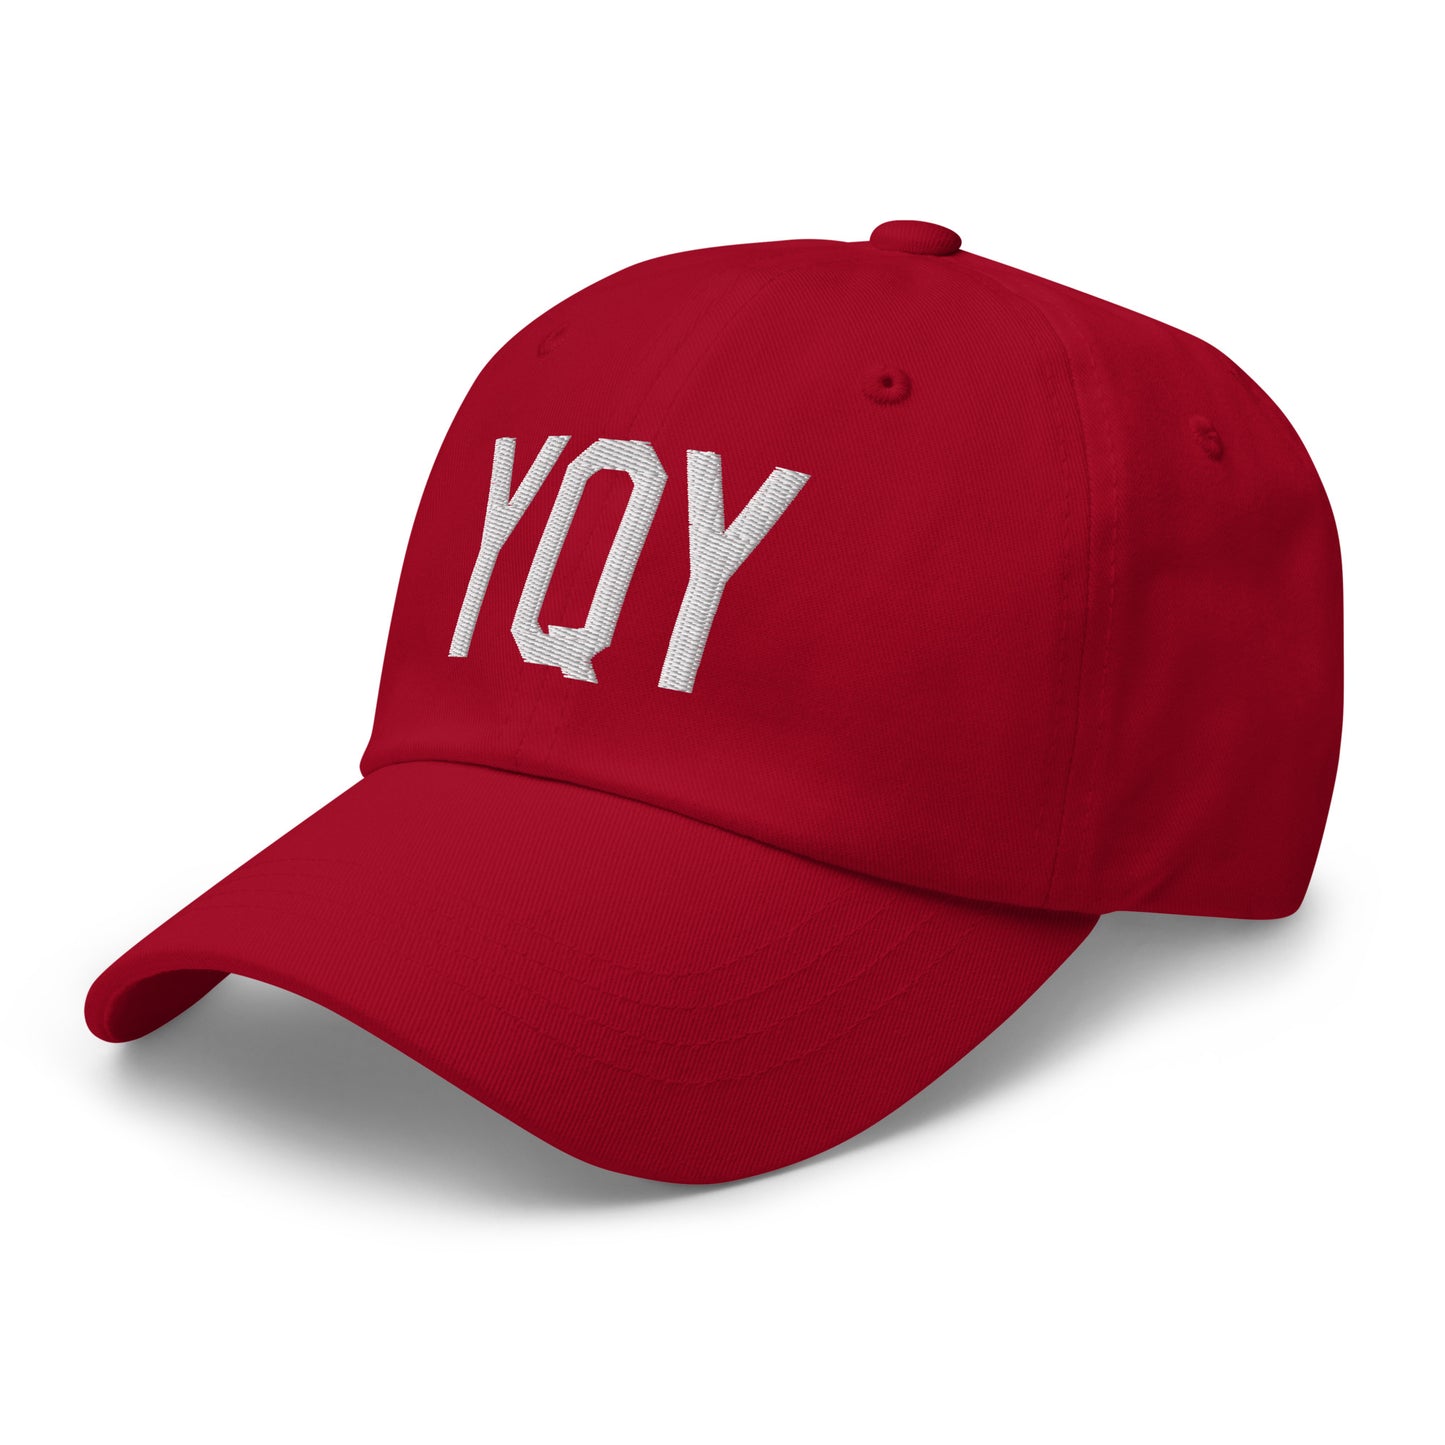 Airport Code Baseball Cap - White • YQY Sydney • YHM Designs - Image 21